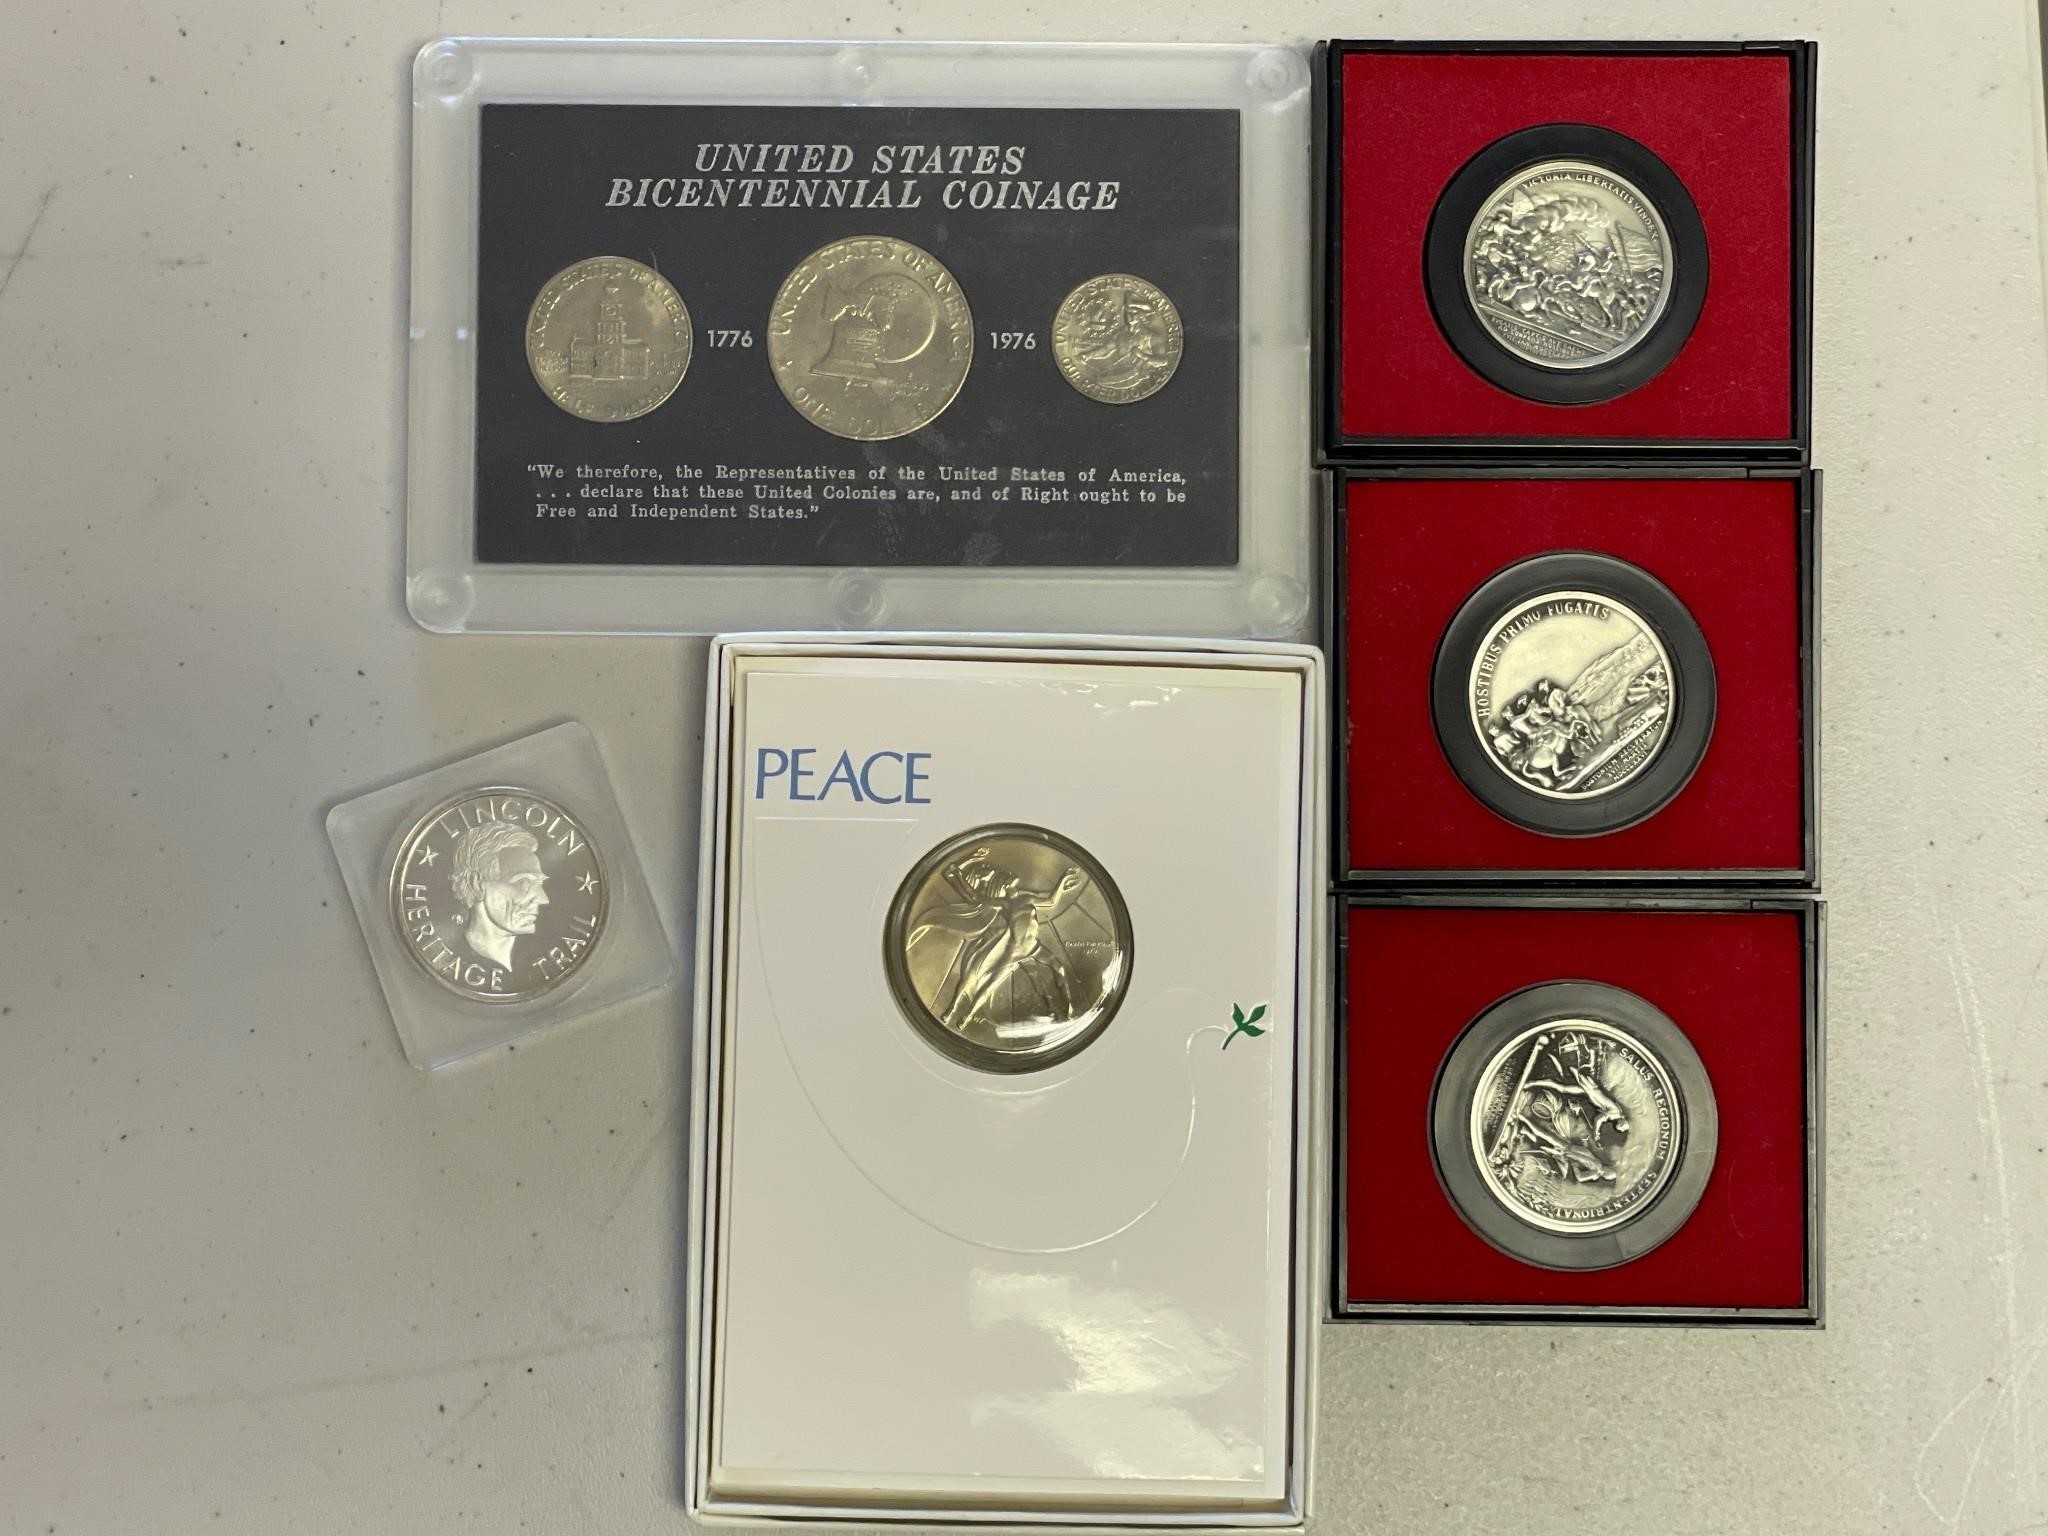 Collectible coins/medals